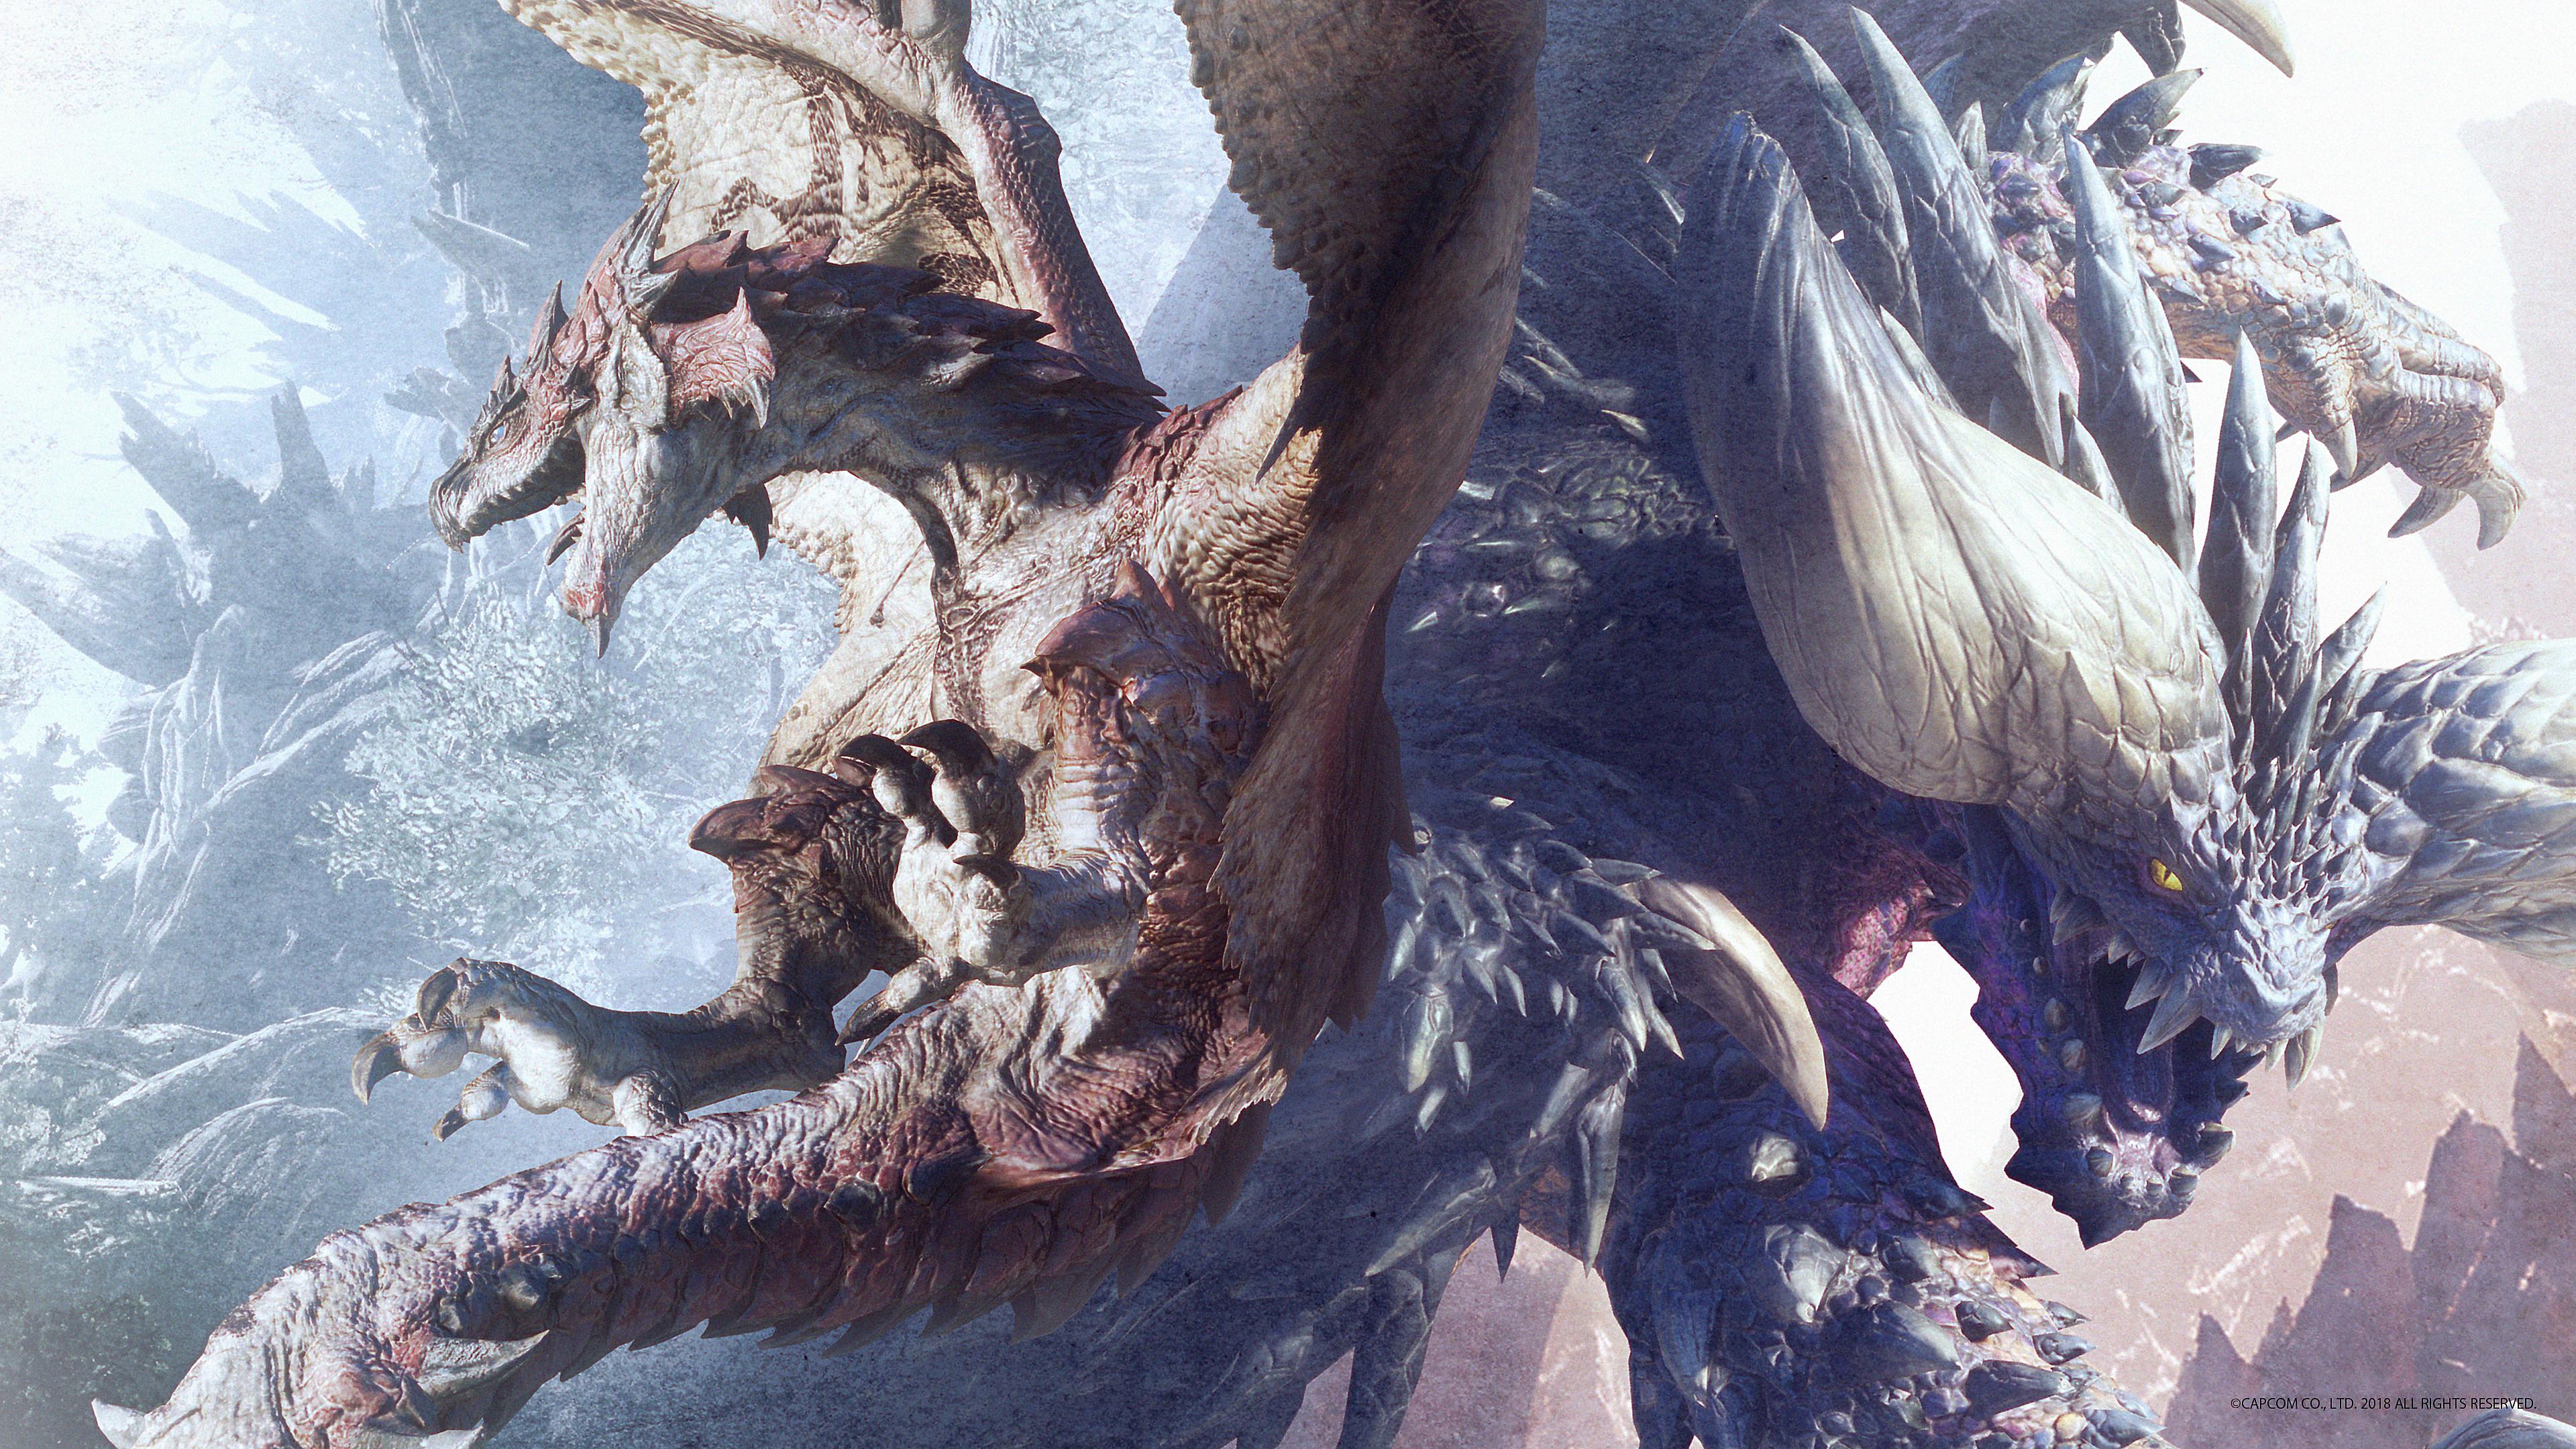 Rathalos And Nergigante 4k Ultra HD Wallpaper. Background Image